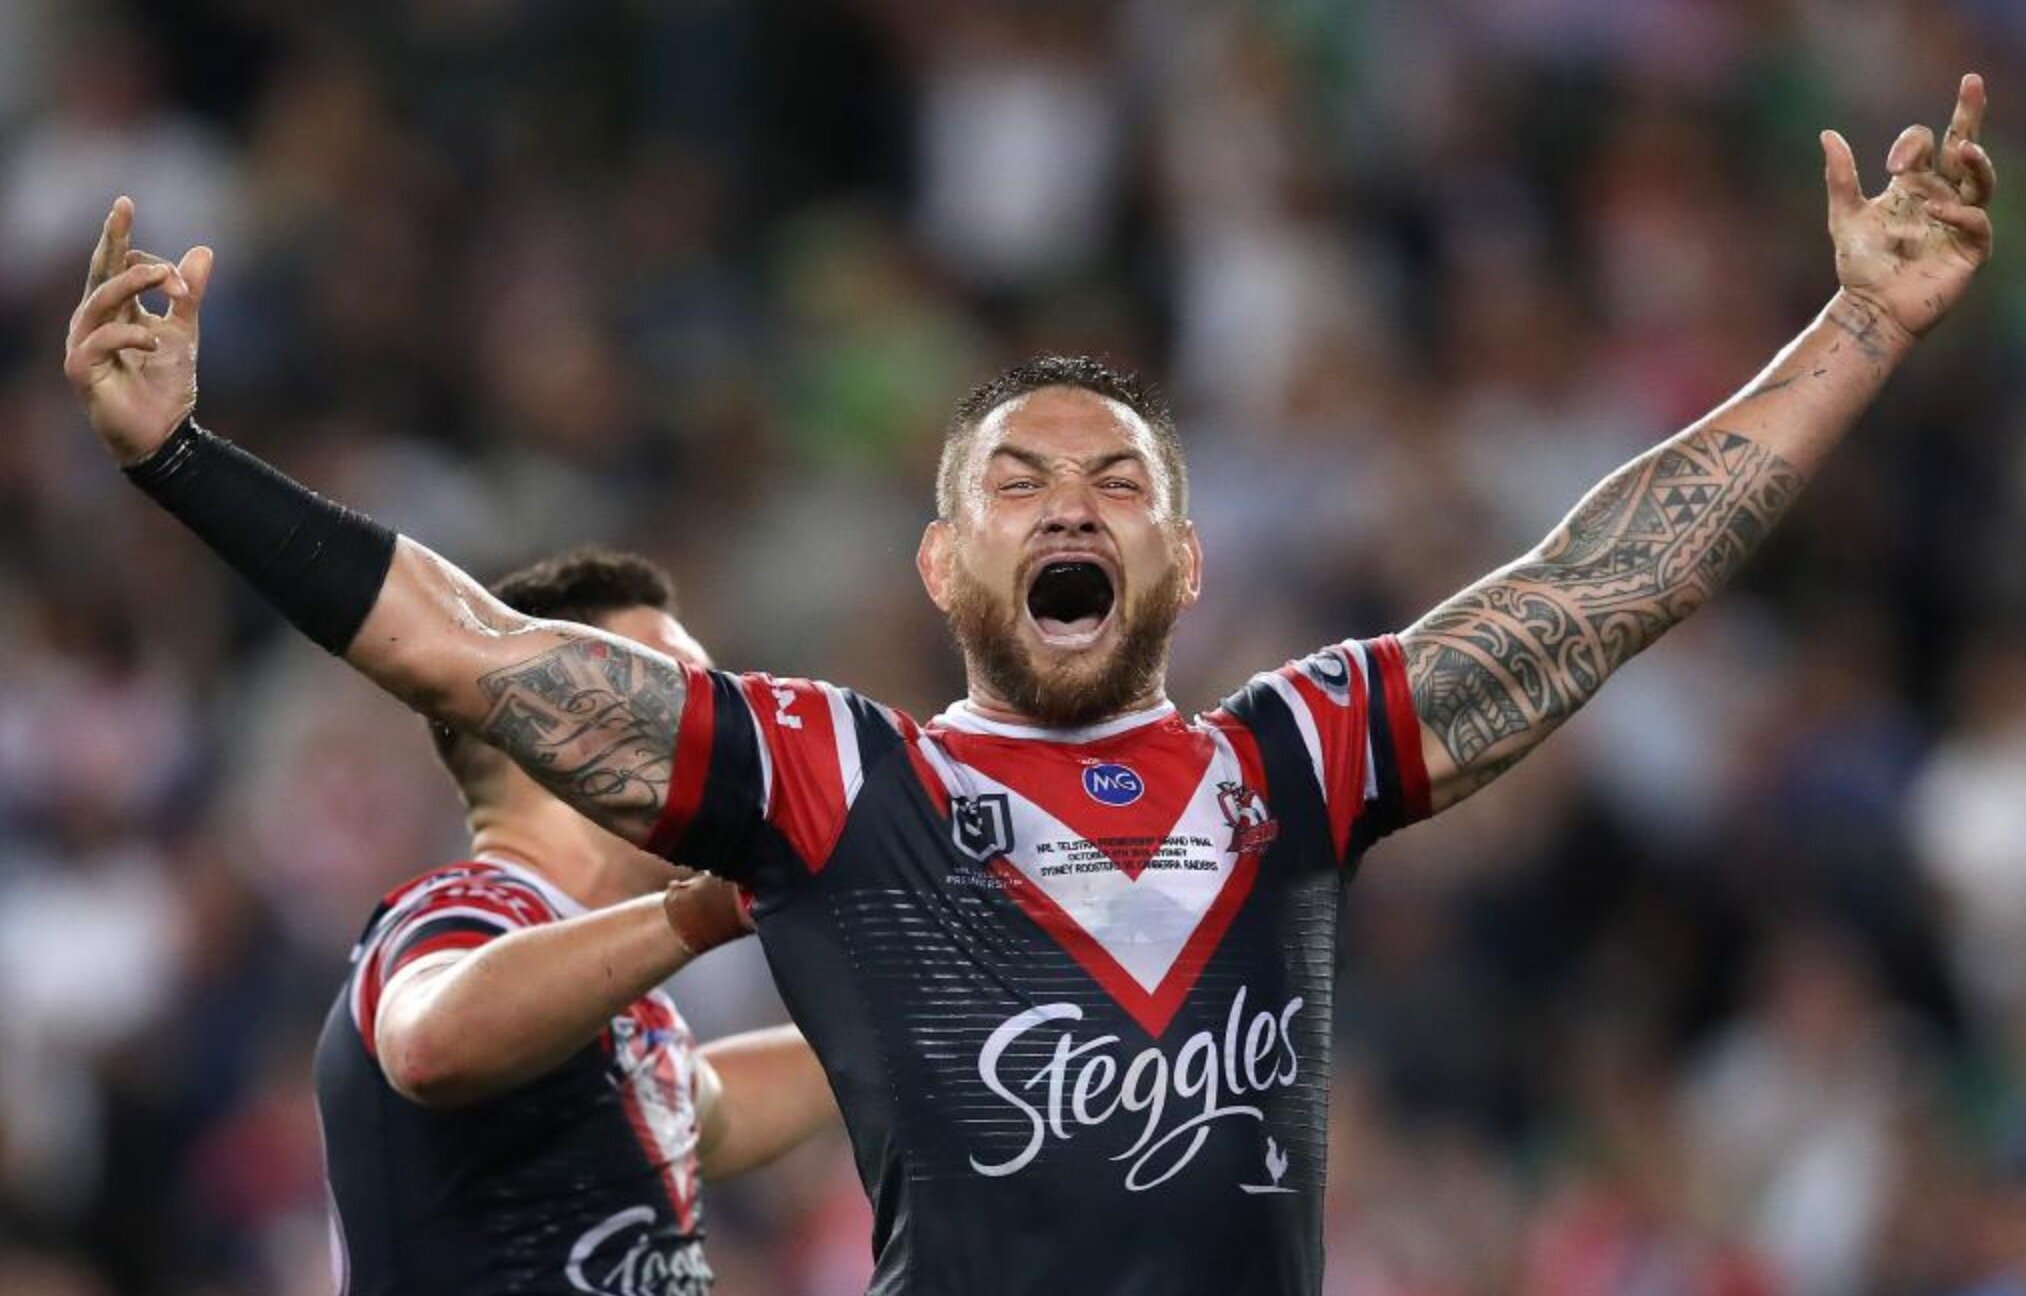   A Rooster victory fails to deliver massive audience for Nine  image copyright - News Corp 